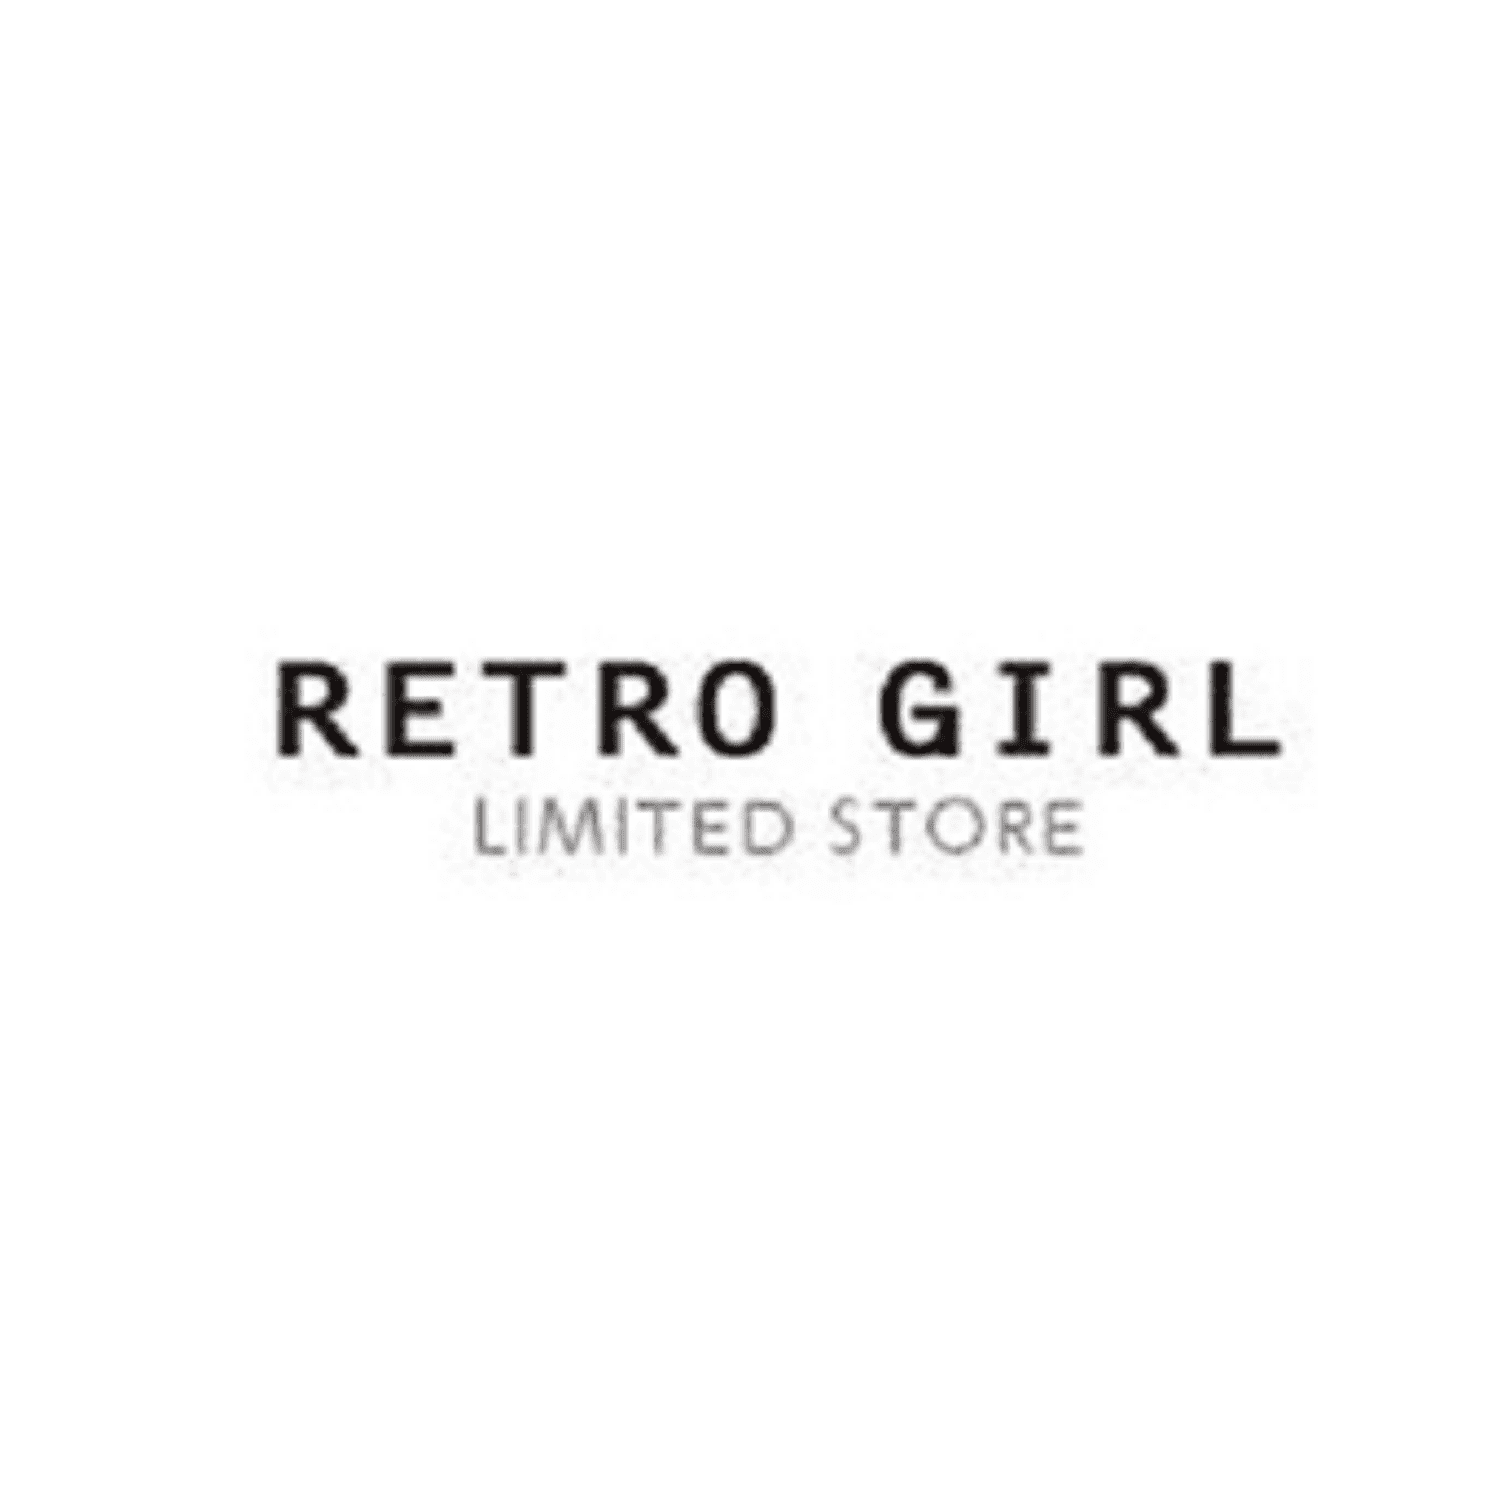 RETRO GIRL Limited Store